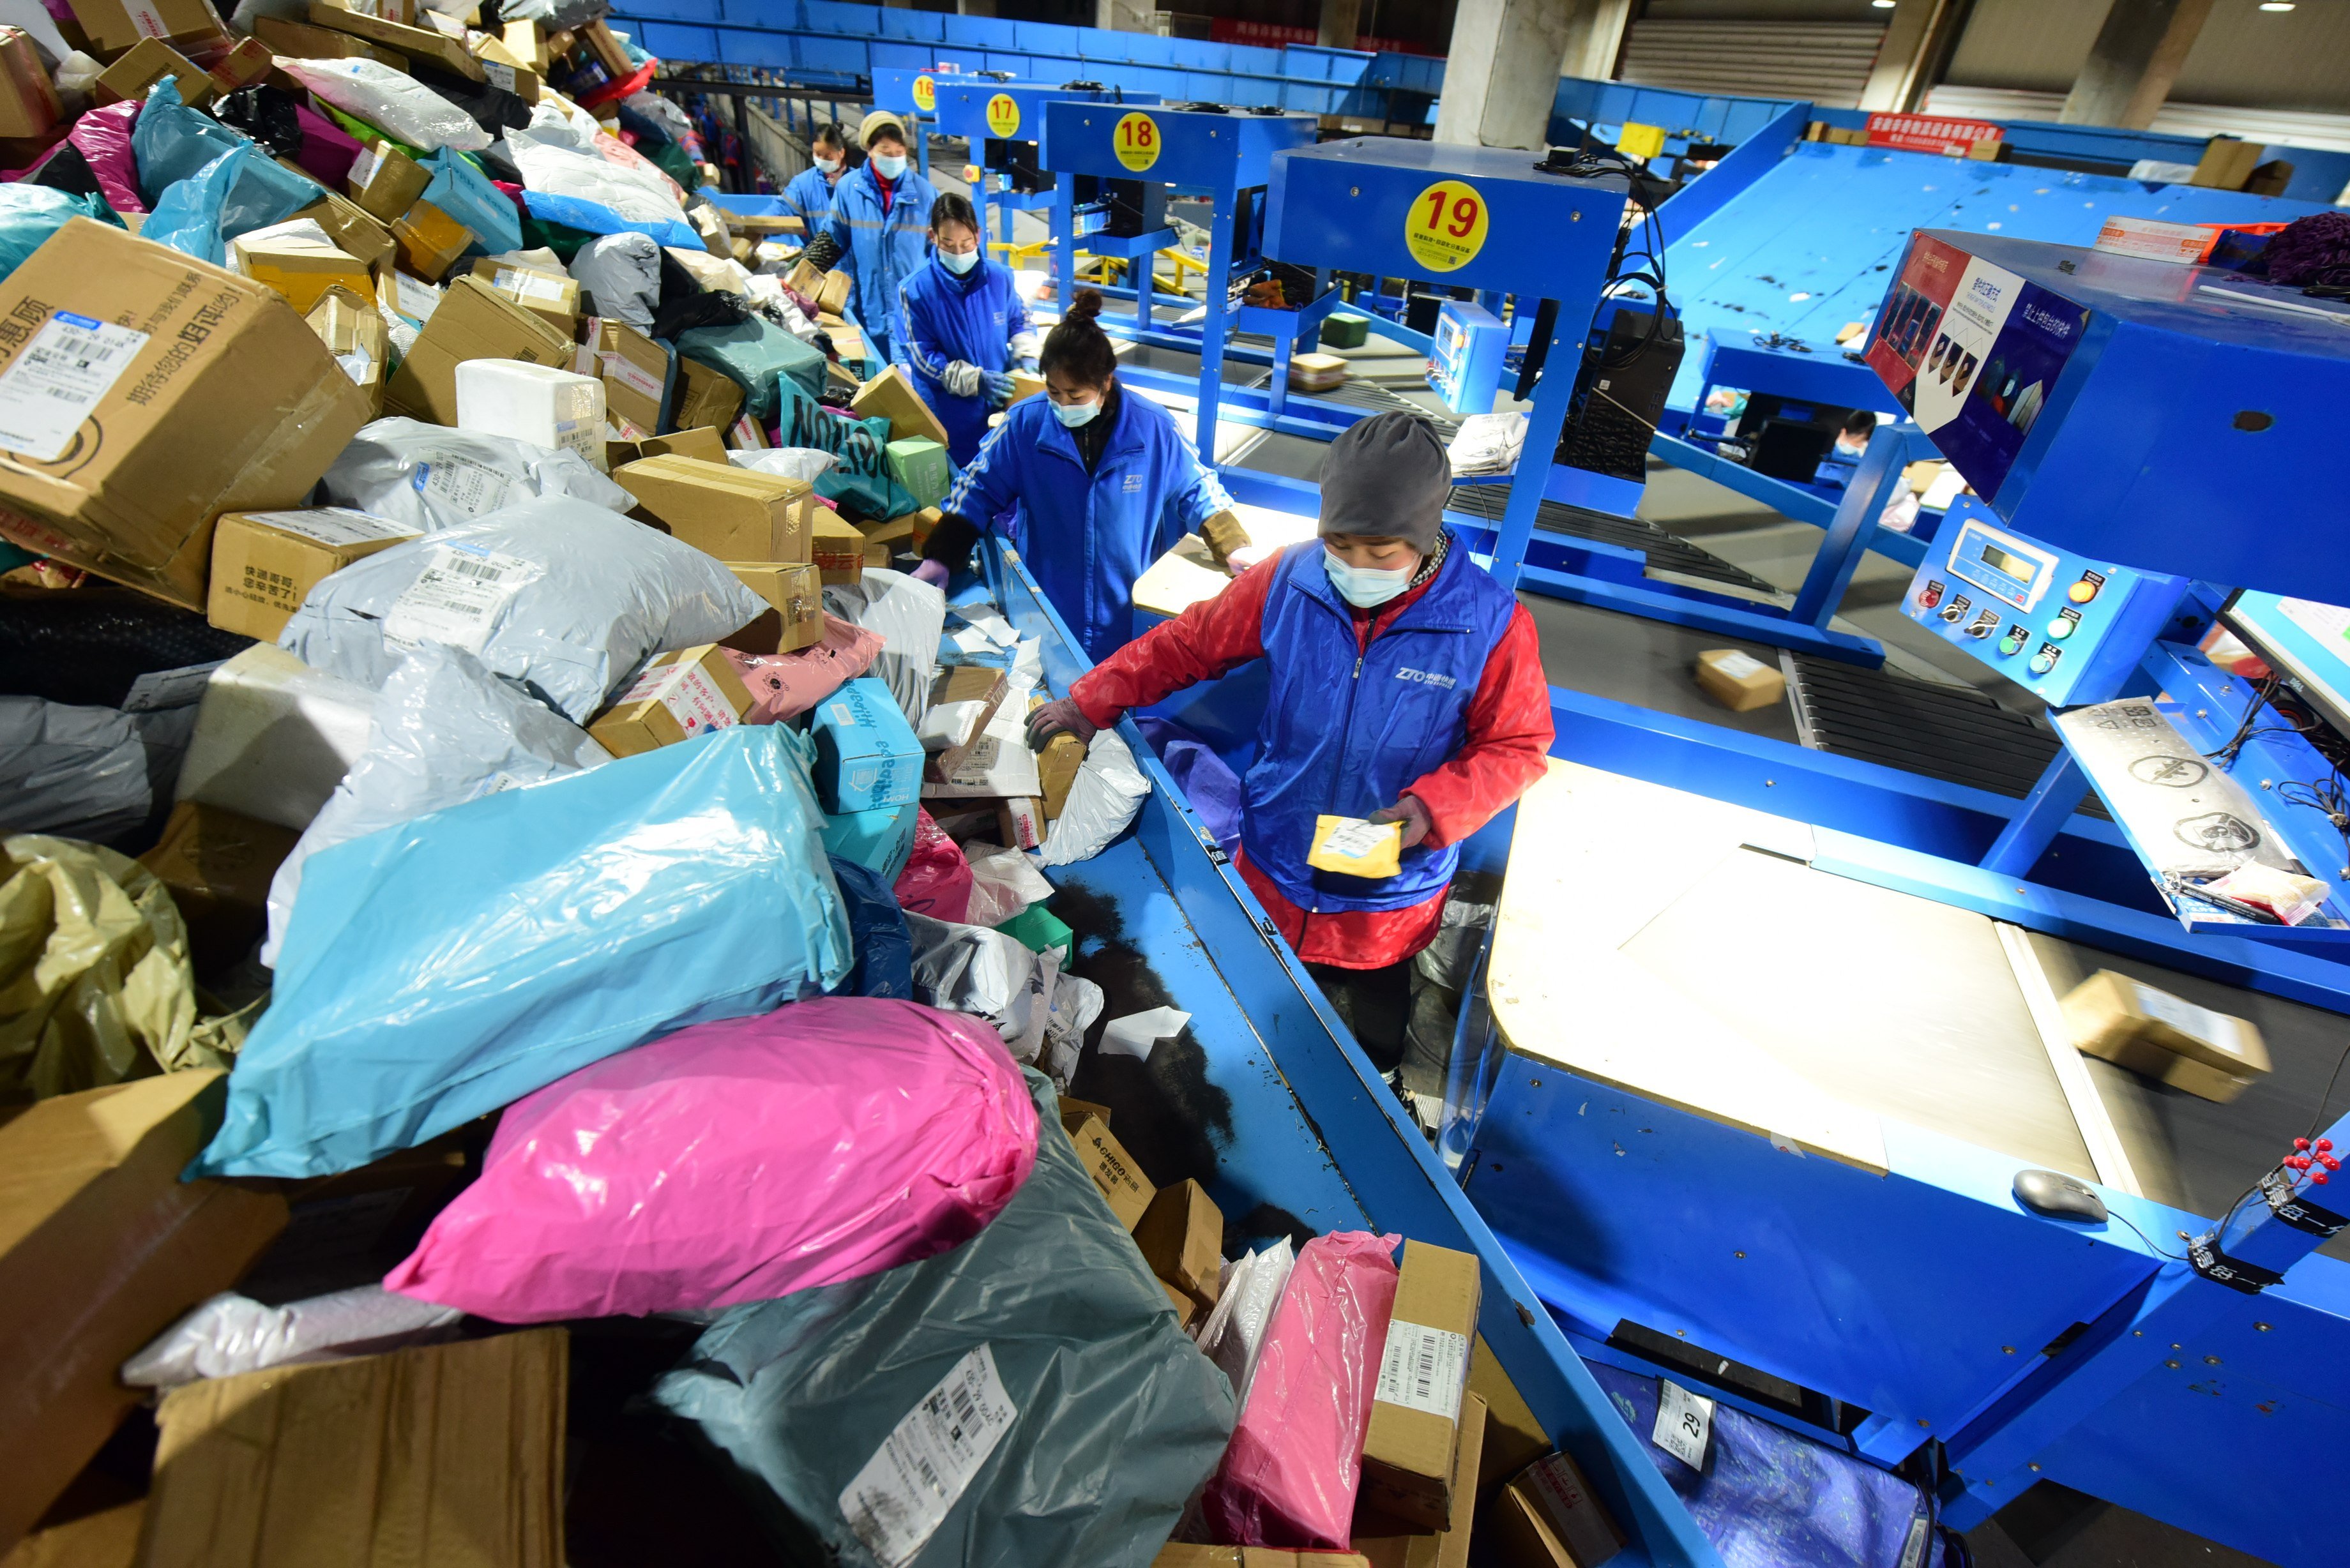 Workers are sorting parcels at an e-commerce logistics park in Lianyungang, China’s Jiangsu province. Photo: NurPhoto via Getty Images